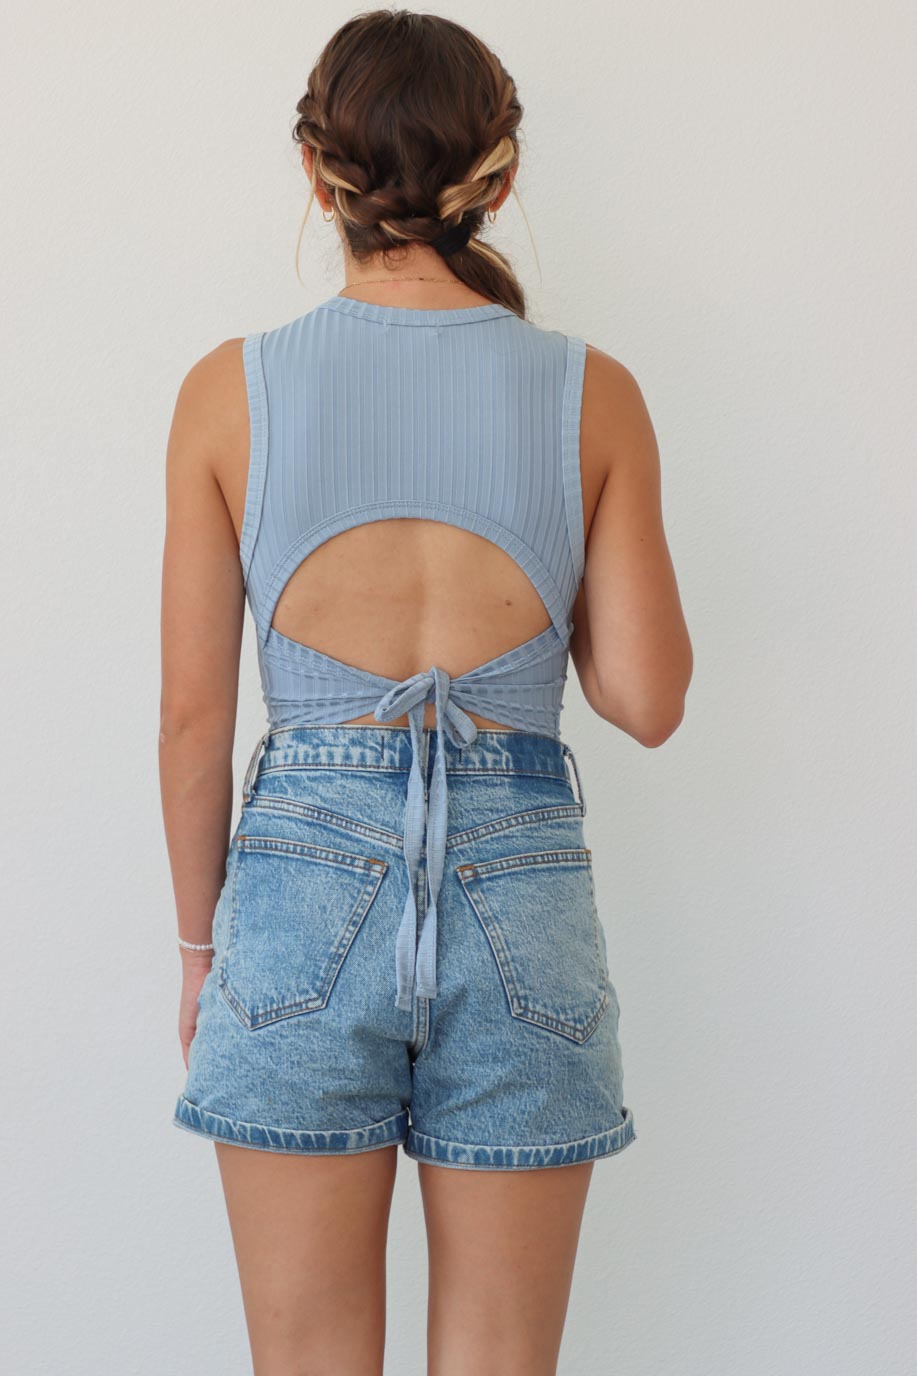 girl wearing light blue tank top with open back detailing